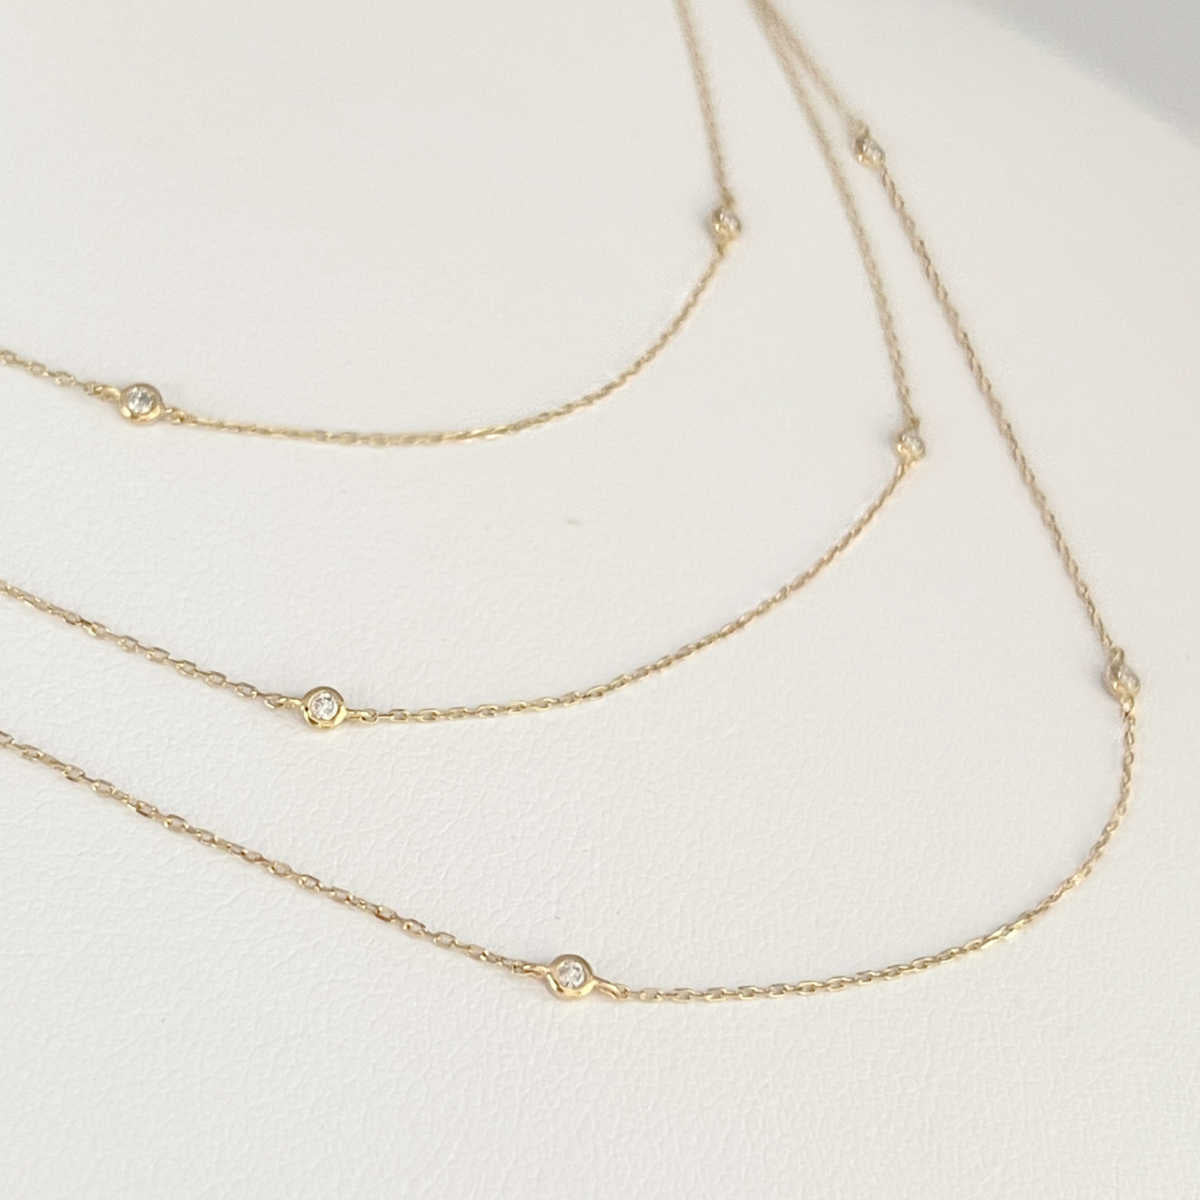 18K YELLOW GOLD DIAMONDS BY THE INCH 5 STATION 'Y' NECKLACE - Roberto Coin  - North America